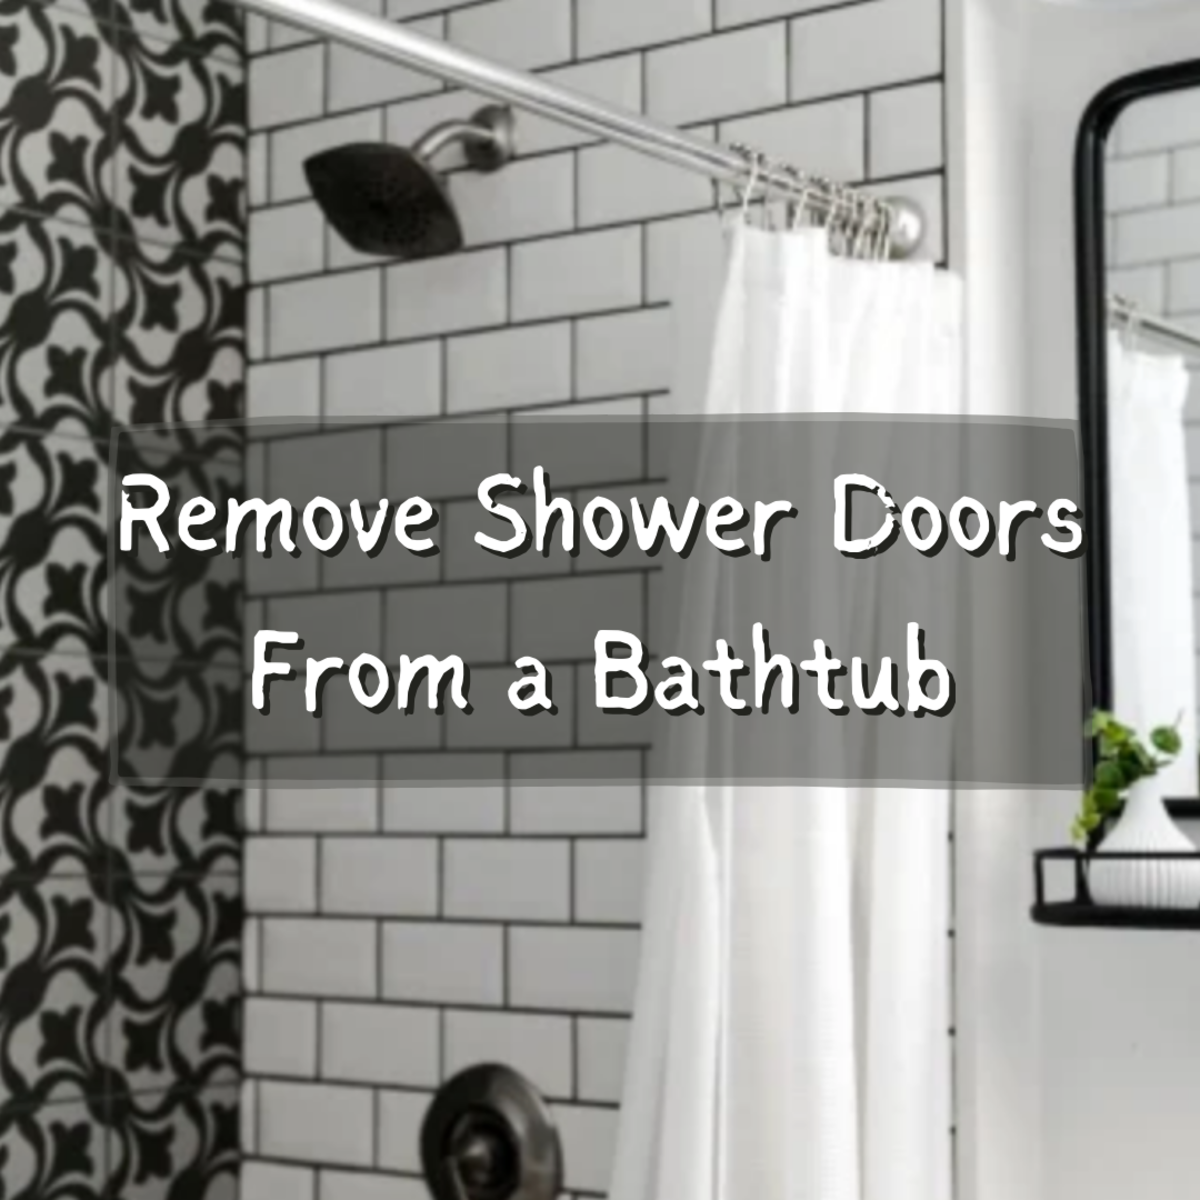 DIY Guide to Remove Shower Doors From a Bathtub - Dengarden